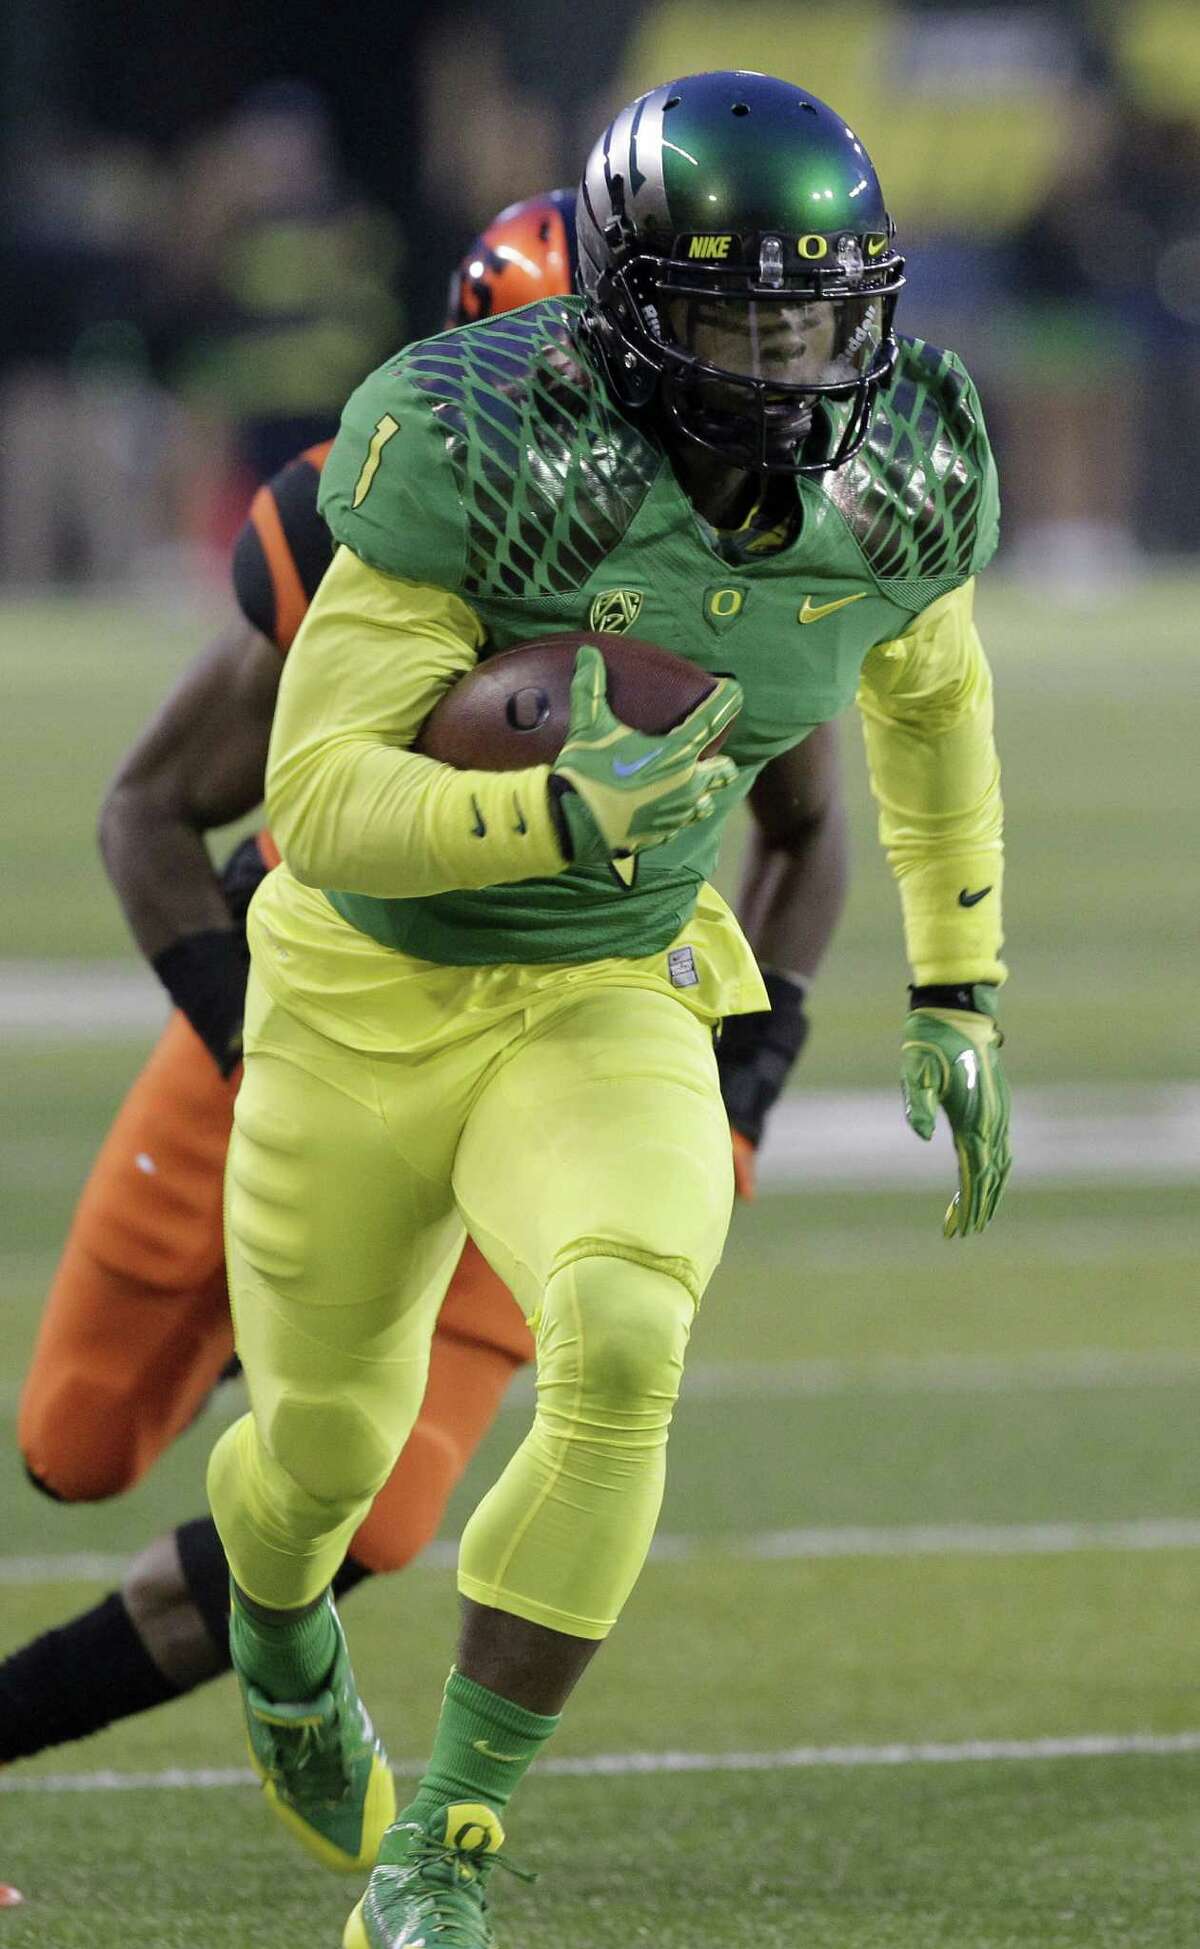 Oregon's Josh Huff, a Houston Nimitz graduate, leads the Ducks in receptions (57), receiving yards (1,036) and touchdown catches (11).